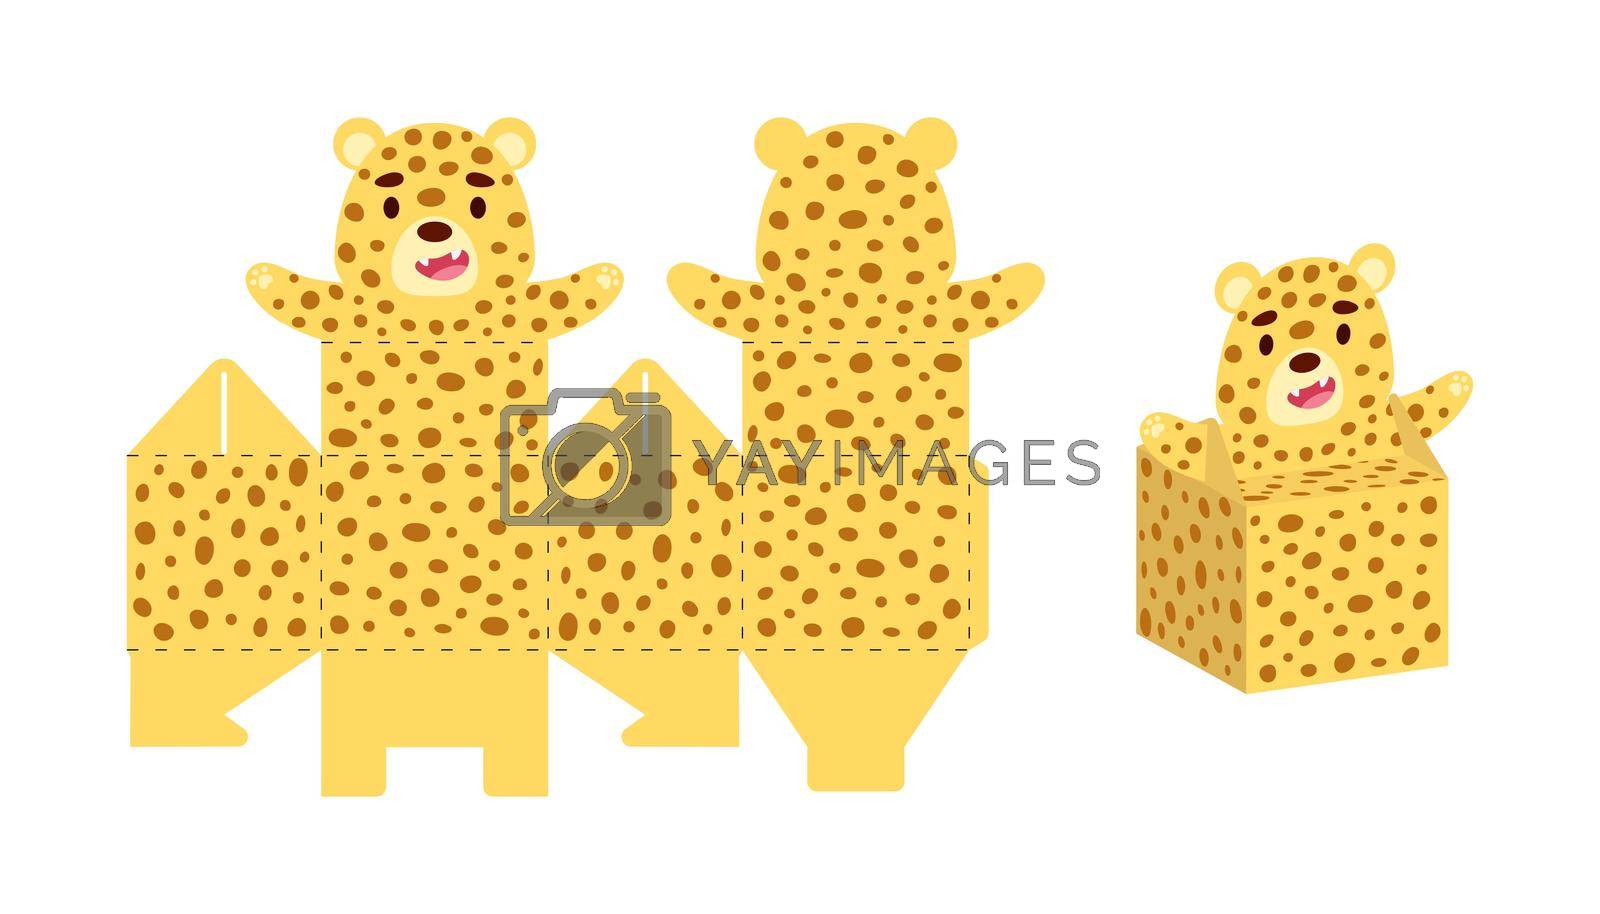 Royalty free image of Simple packaging favor box cheetah design for sweets, candies, small presents. Party package template for any purposes, birthday, baby shower. Print, cut out, fold, glue. Vector stock illustration by Melnyk